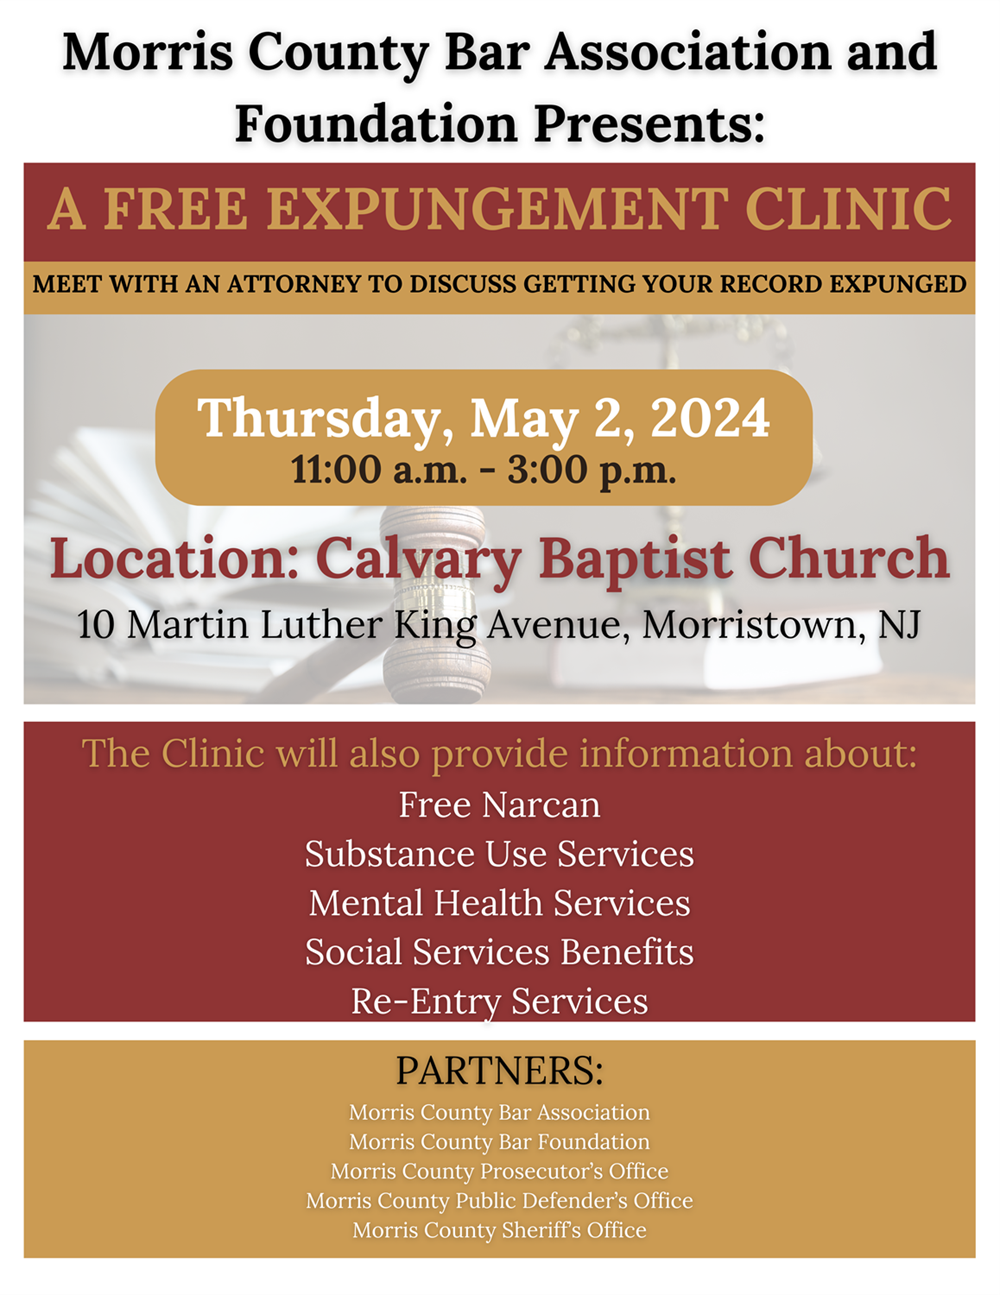 Expungement Clinic 2024 Flier SOCIAL.png